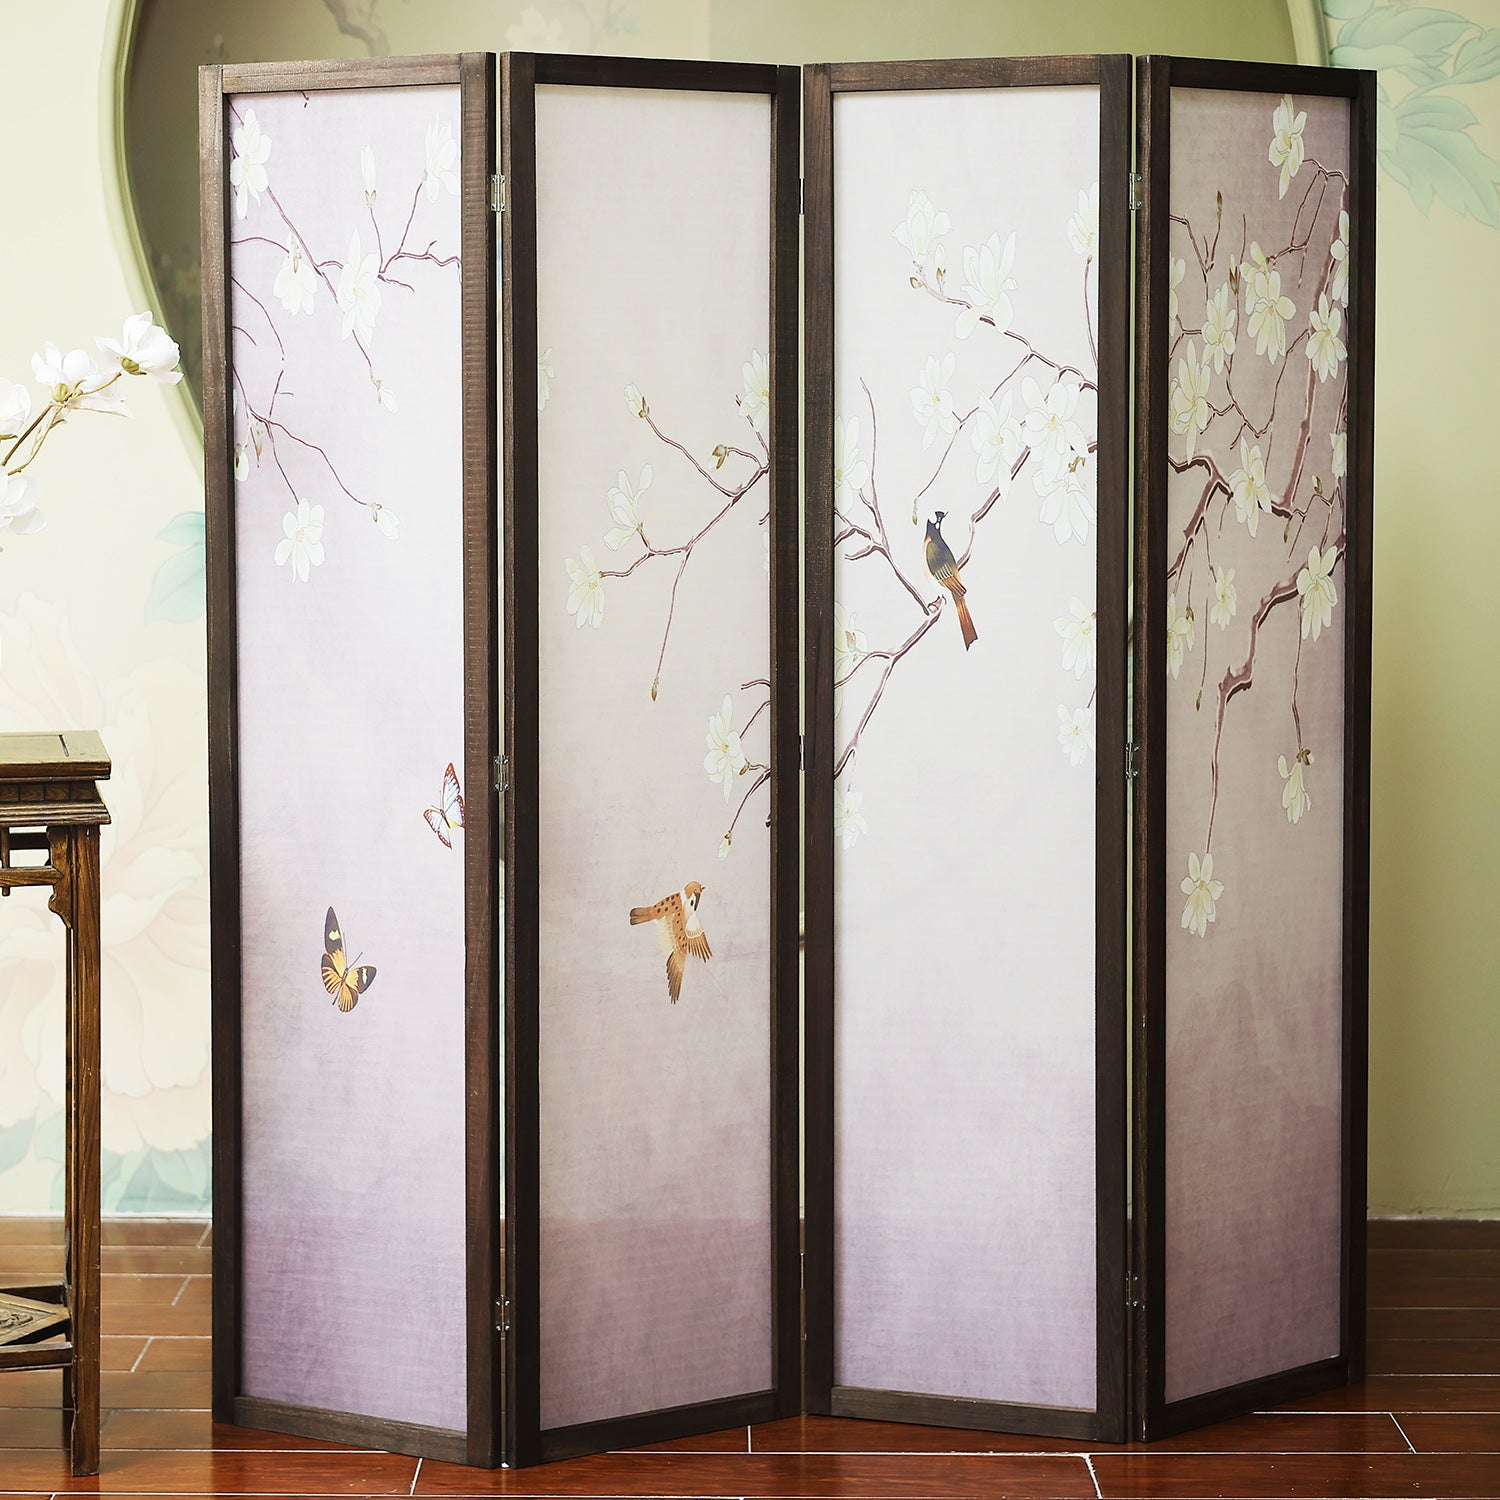 Furnnylane 4 Panel Room Divider Screen,Folding Wall Divider for Room  Separation,Panel Room Divider,Magnolia with Birds and Butterfly,67